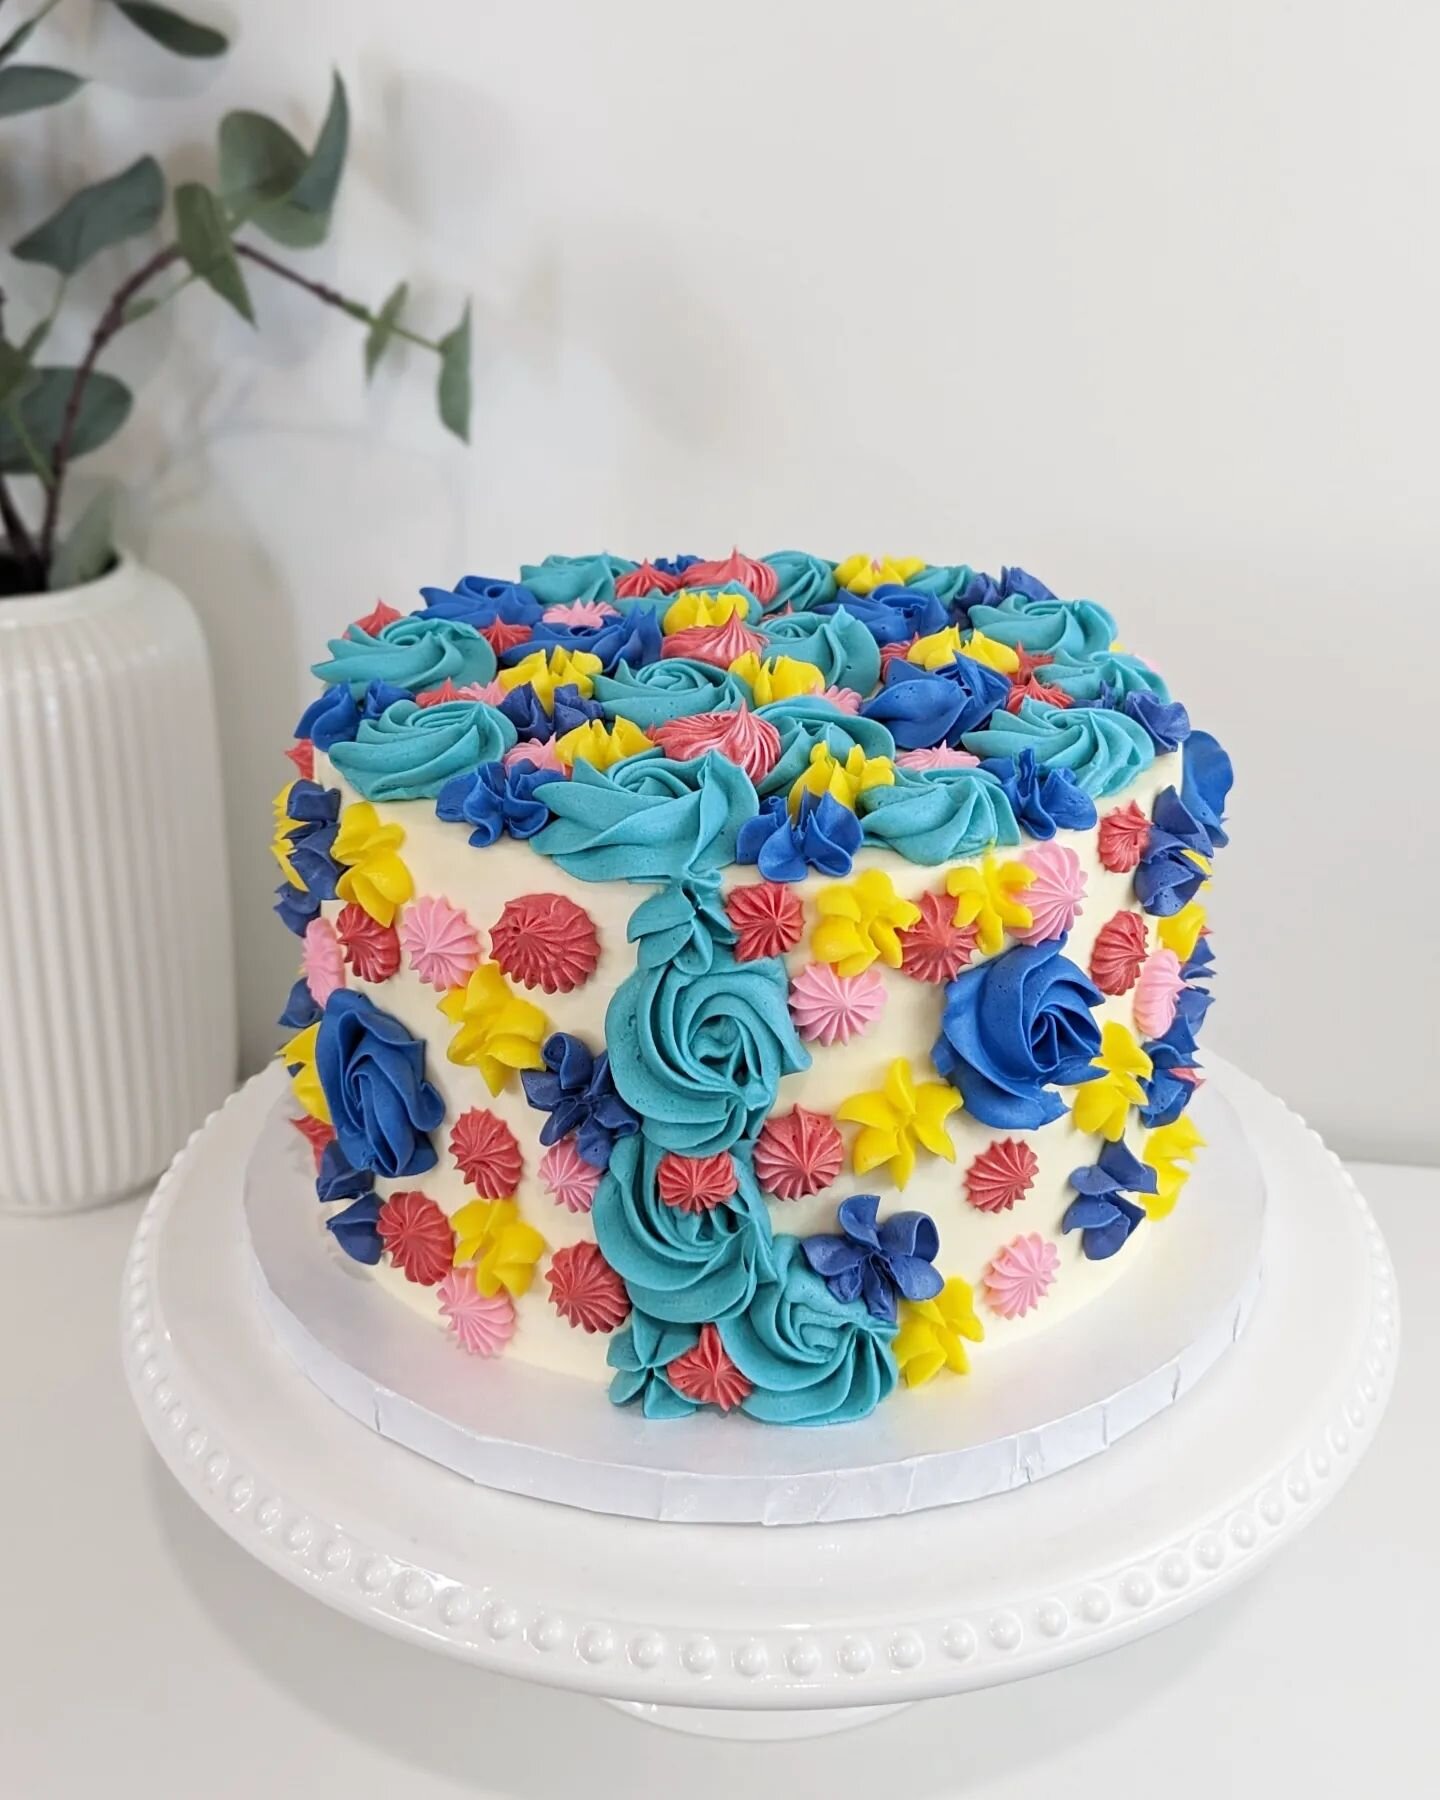 Snowy day after snowy day makes me think we need some colour in our lives! This design was originally done on a Gulab Jamun cake with soft cream frosting so when I got the request to make it in buttercream I was really excited! It came out just as fu